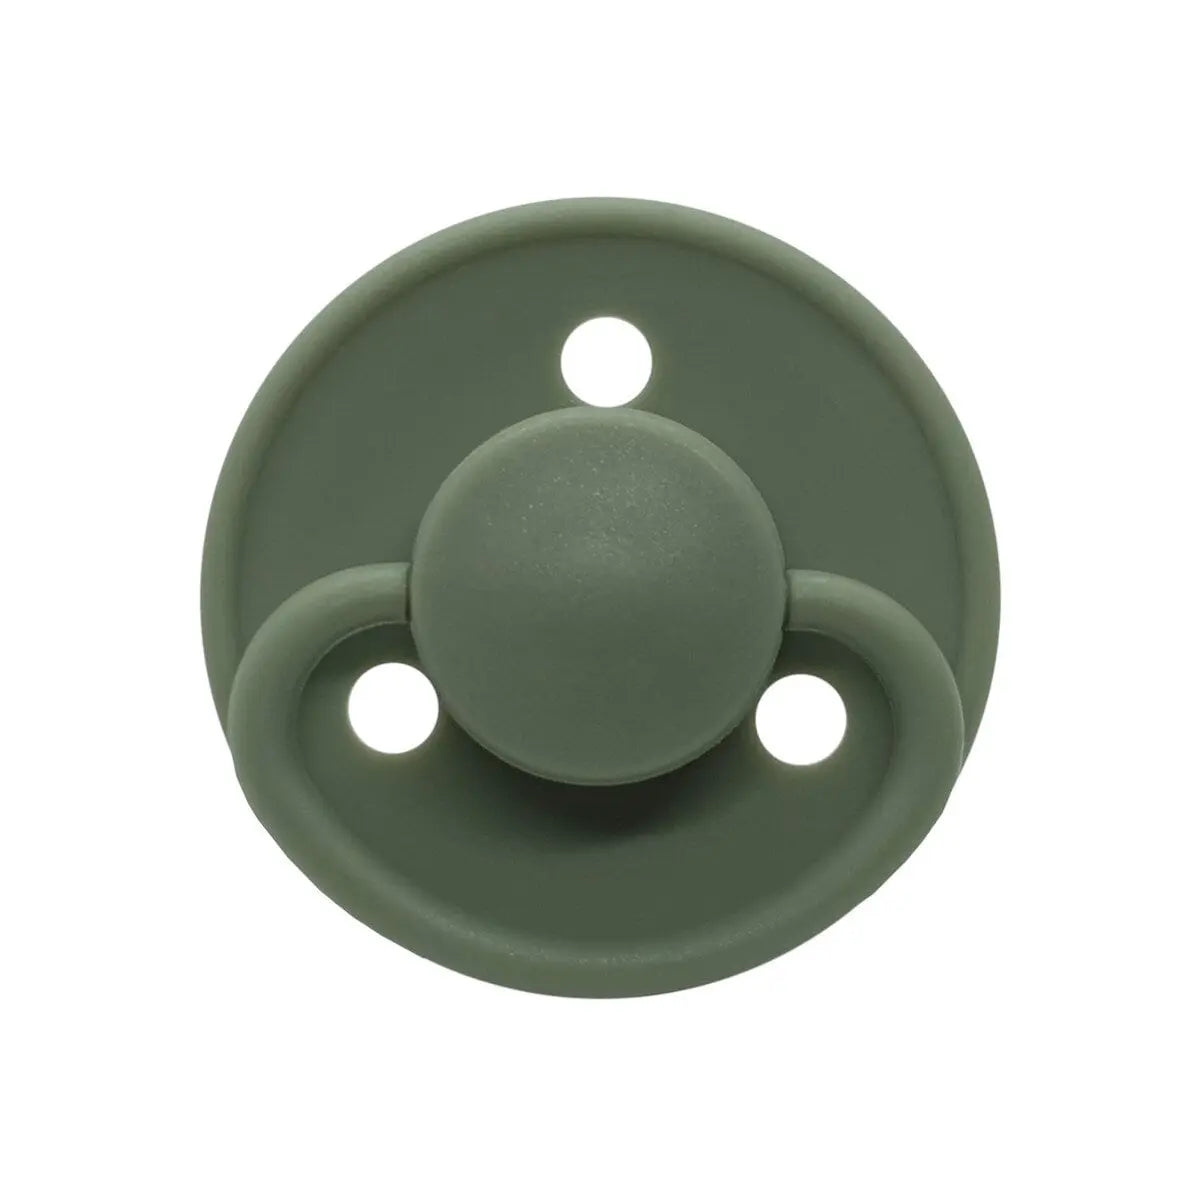 Mininor Pacifier/Dummy Silicone 6m+ 2 pack Willow Green